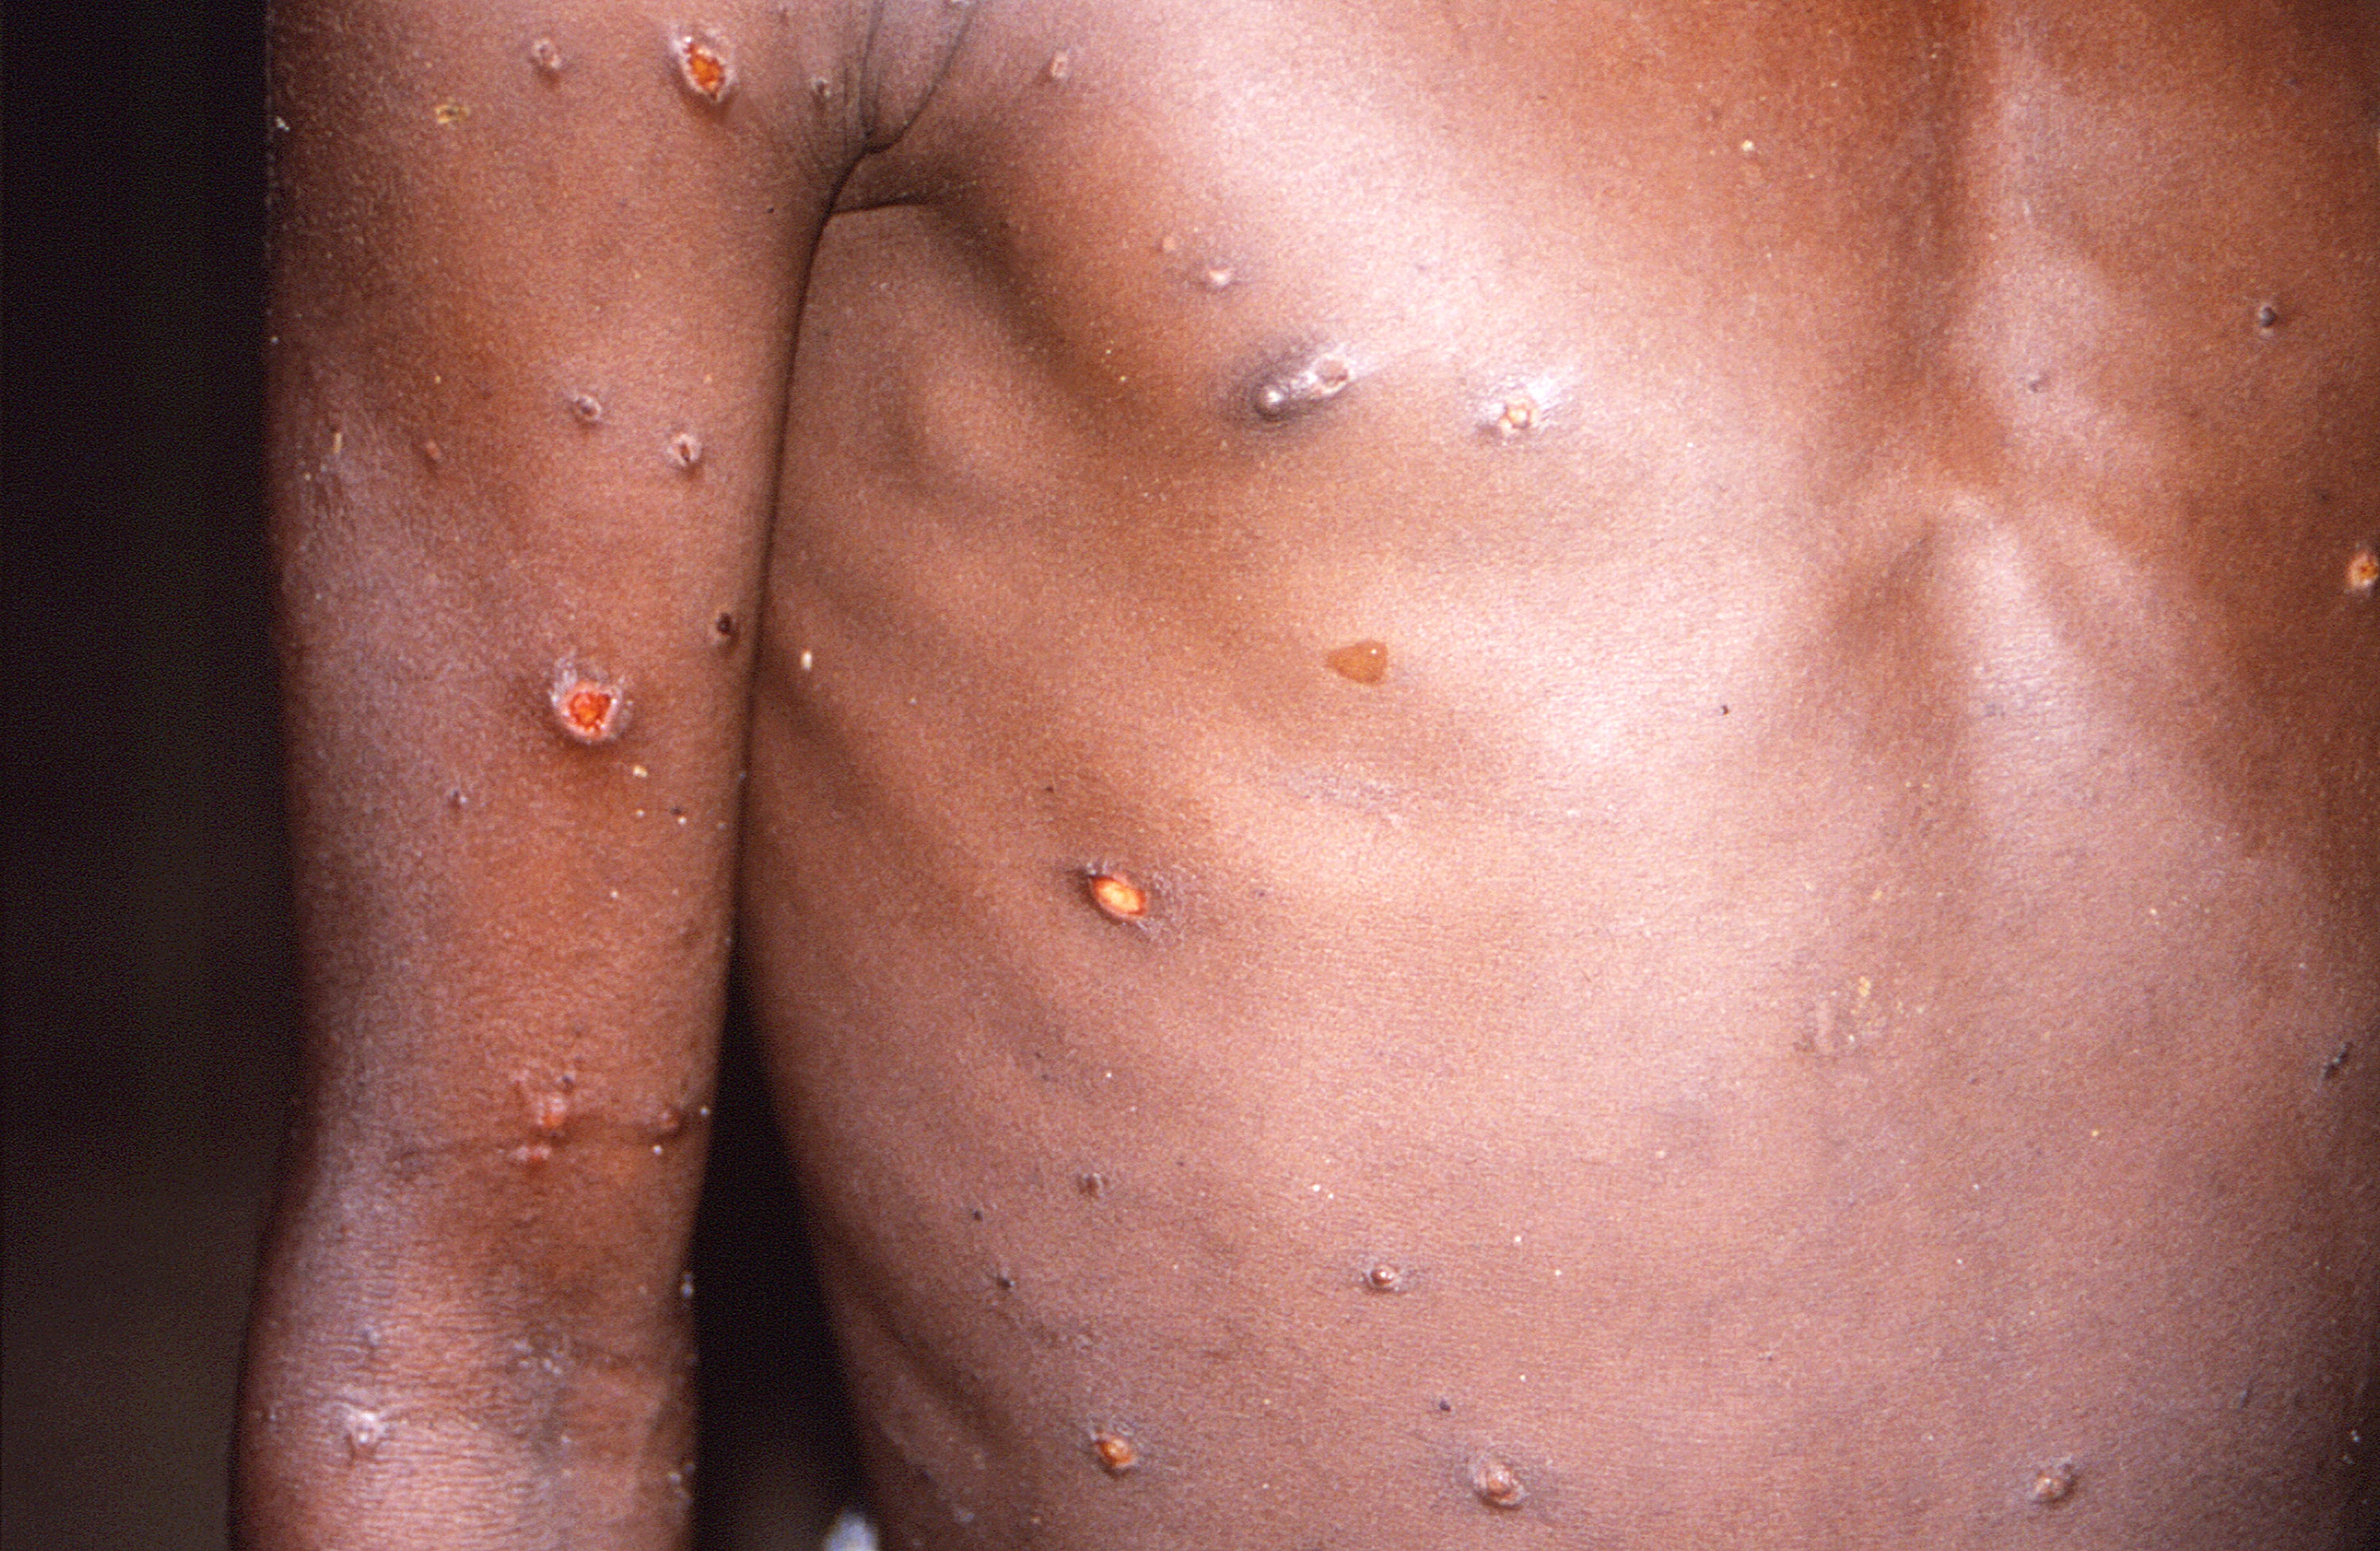 The right arm and torso of a patient with lesions due to monkeypox